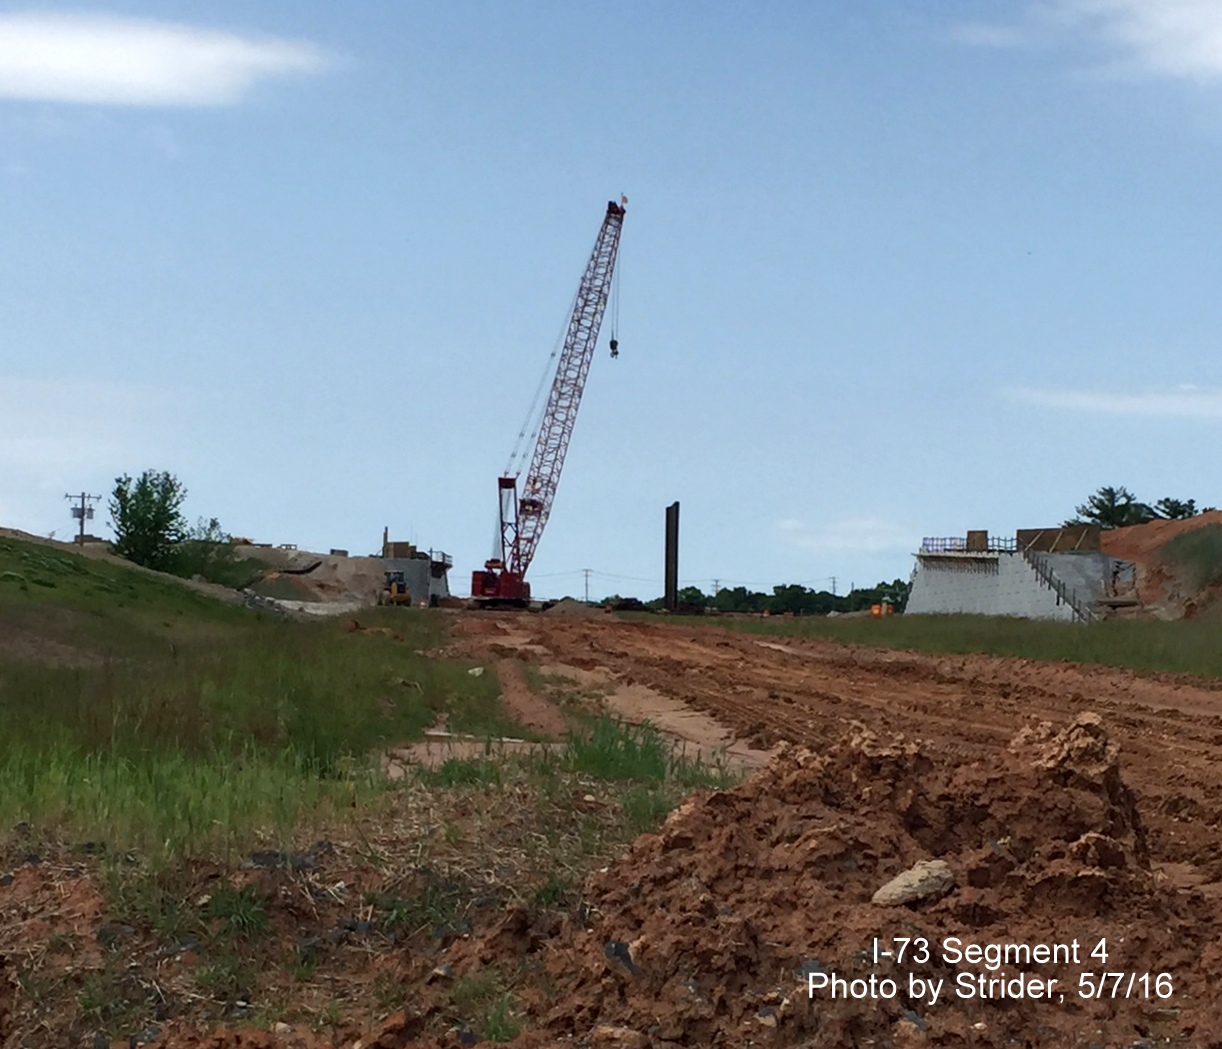 Image of new bridge under construction as seen from Future I-73 North lanes, from Strider